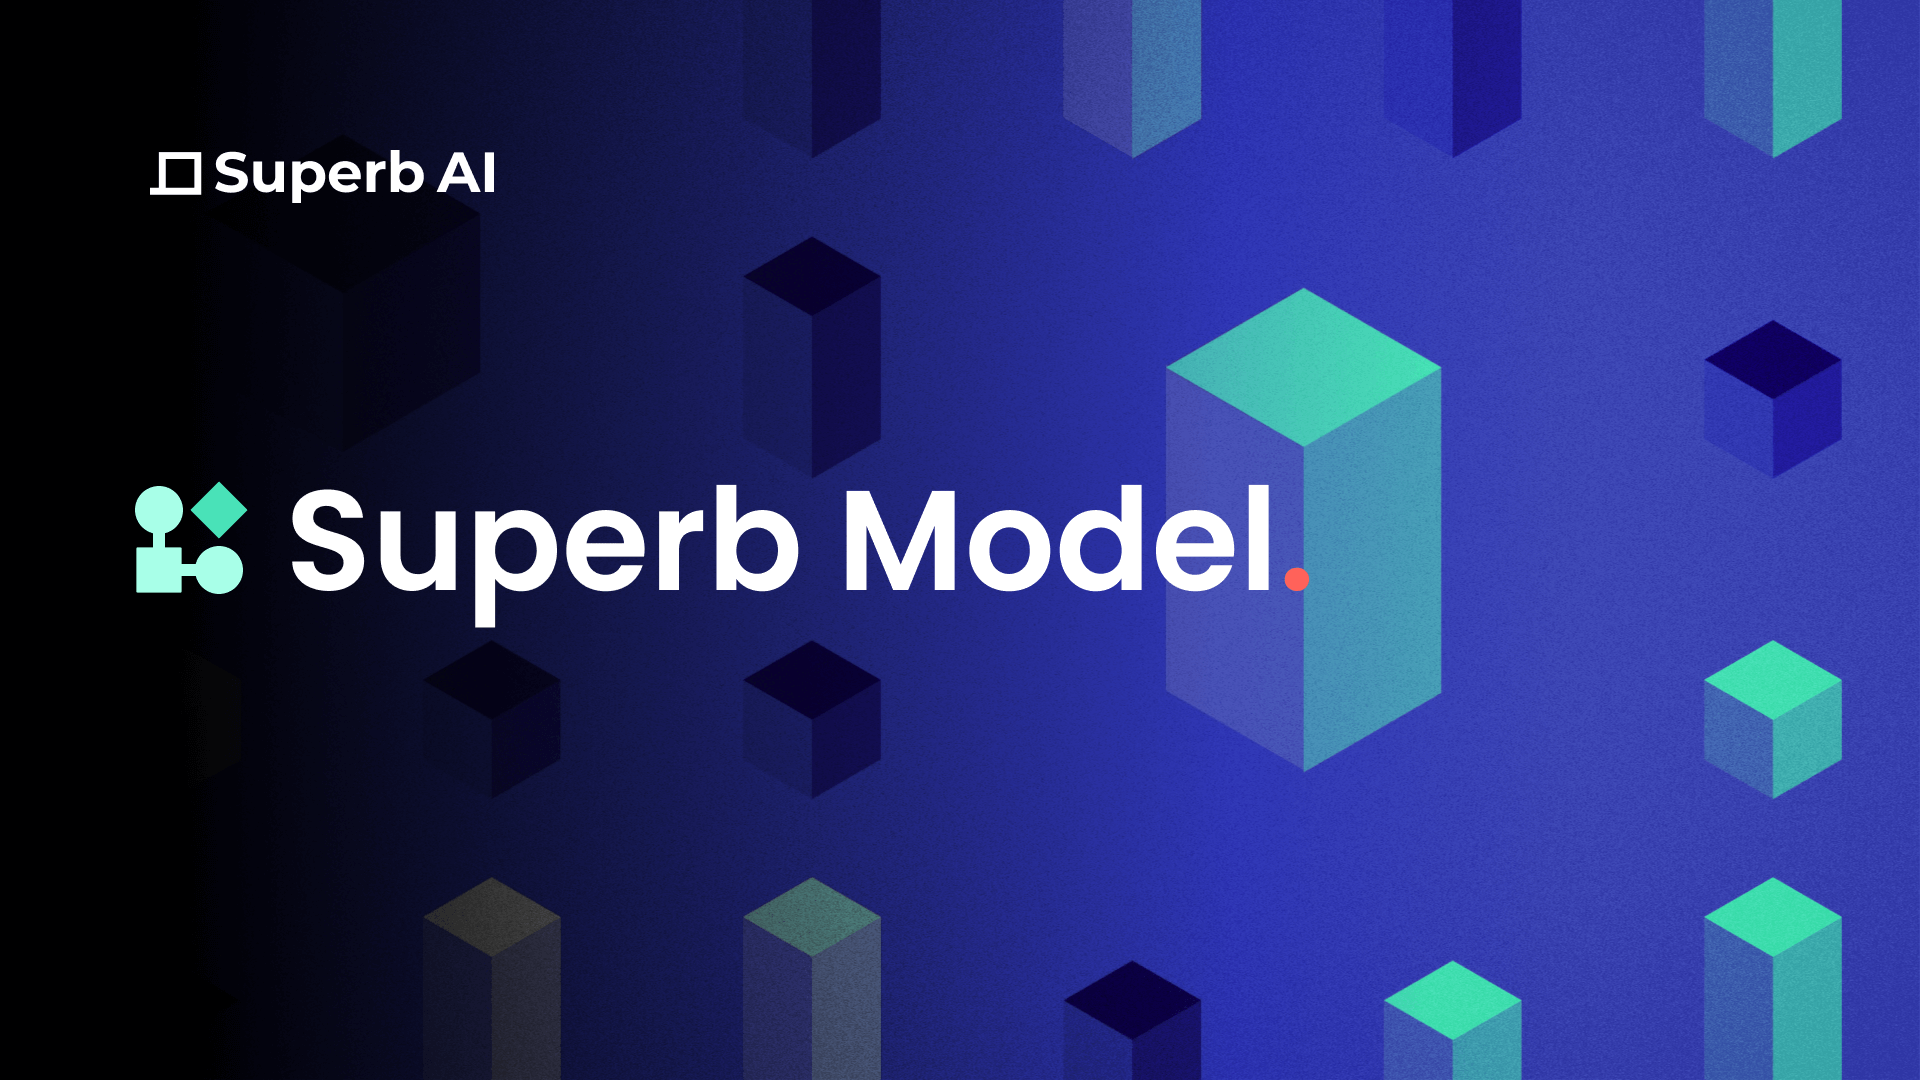 Model helps teams train and deploy high-performance AI models fast with no coding or ML experience required.